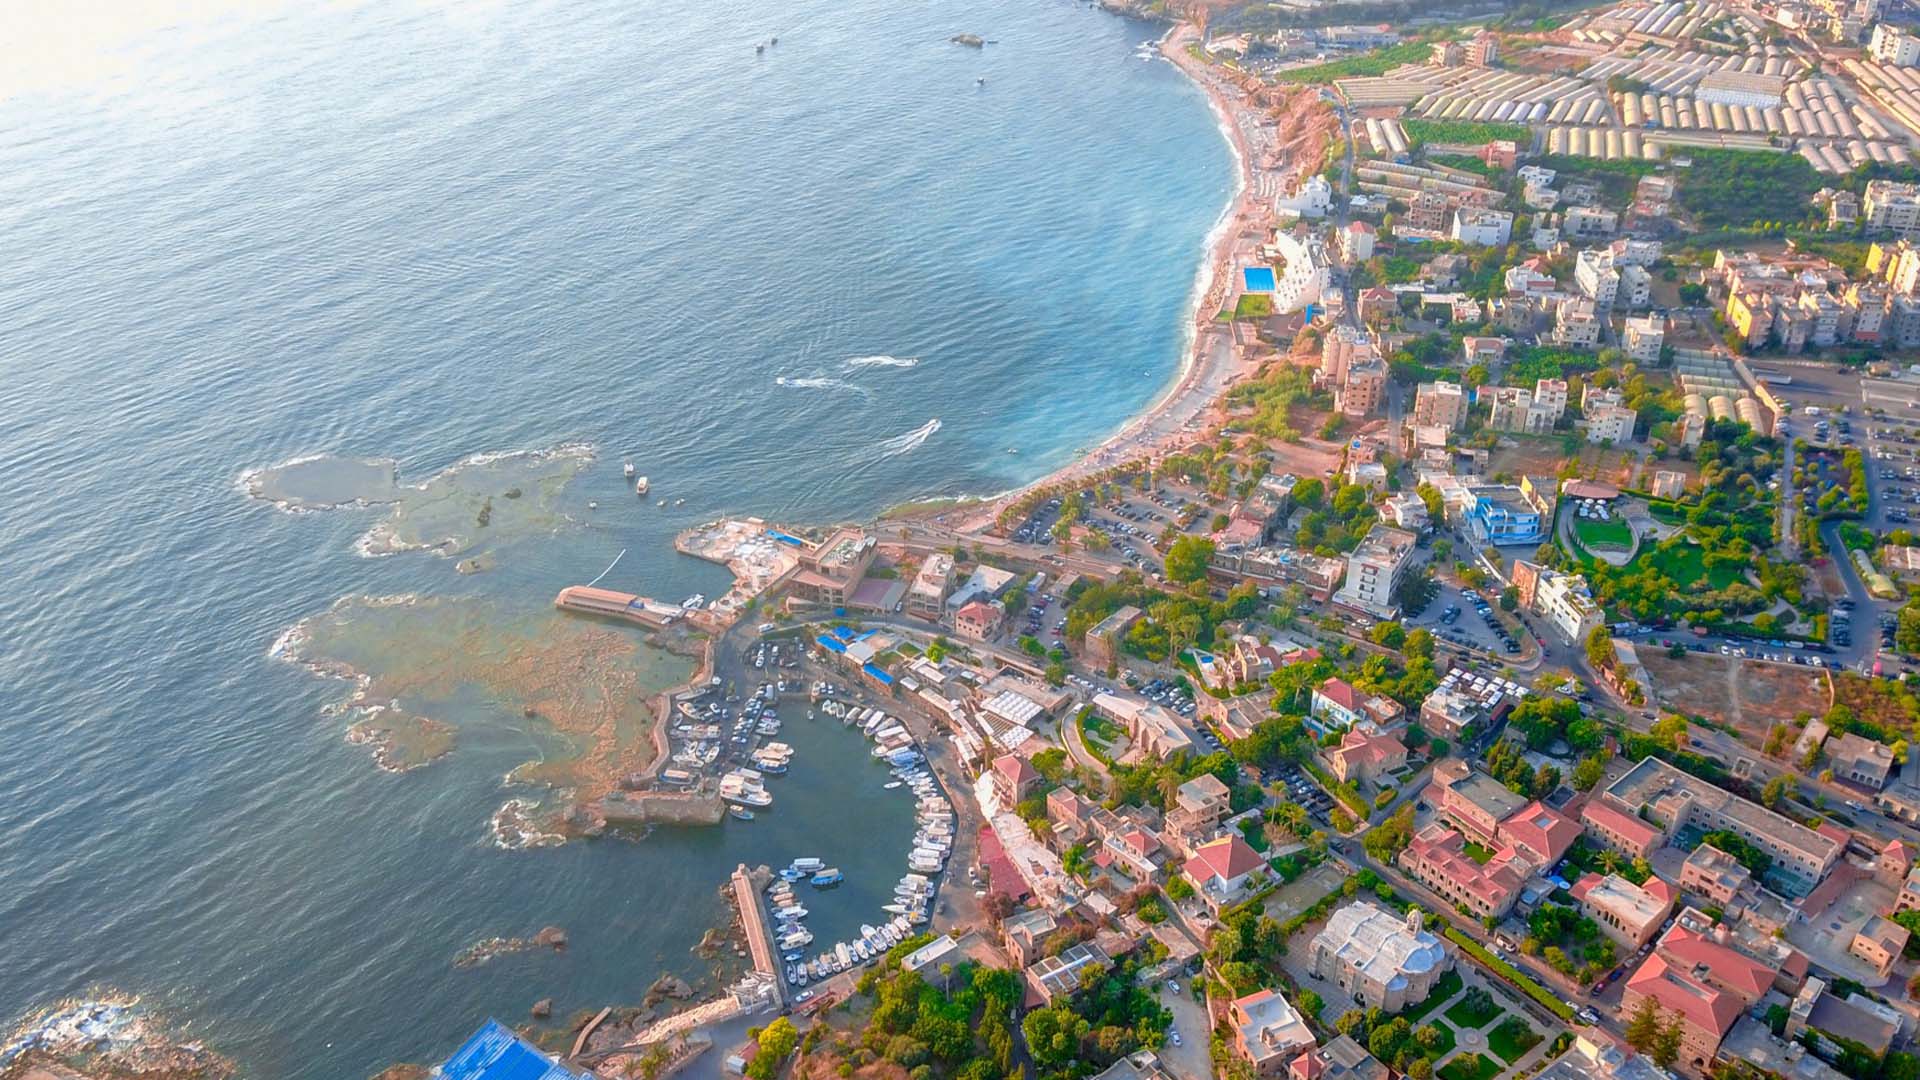 Travel to Lebanon: From an aerial perspective, a photograph unveils the enchanting city of Byblos, seamlessly blending with the shimmering waters of the Mediterranean Sea.